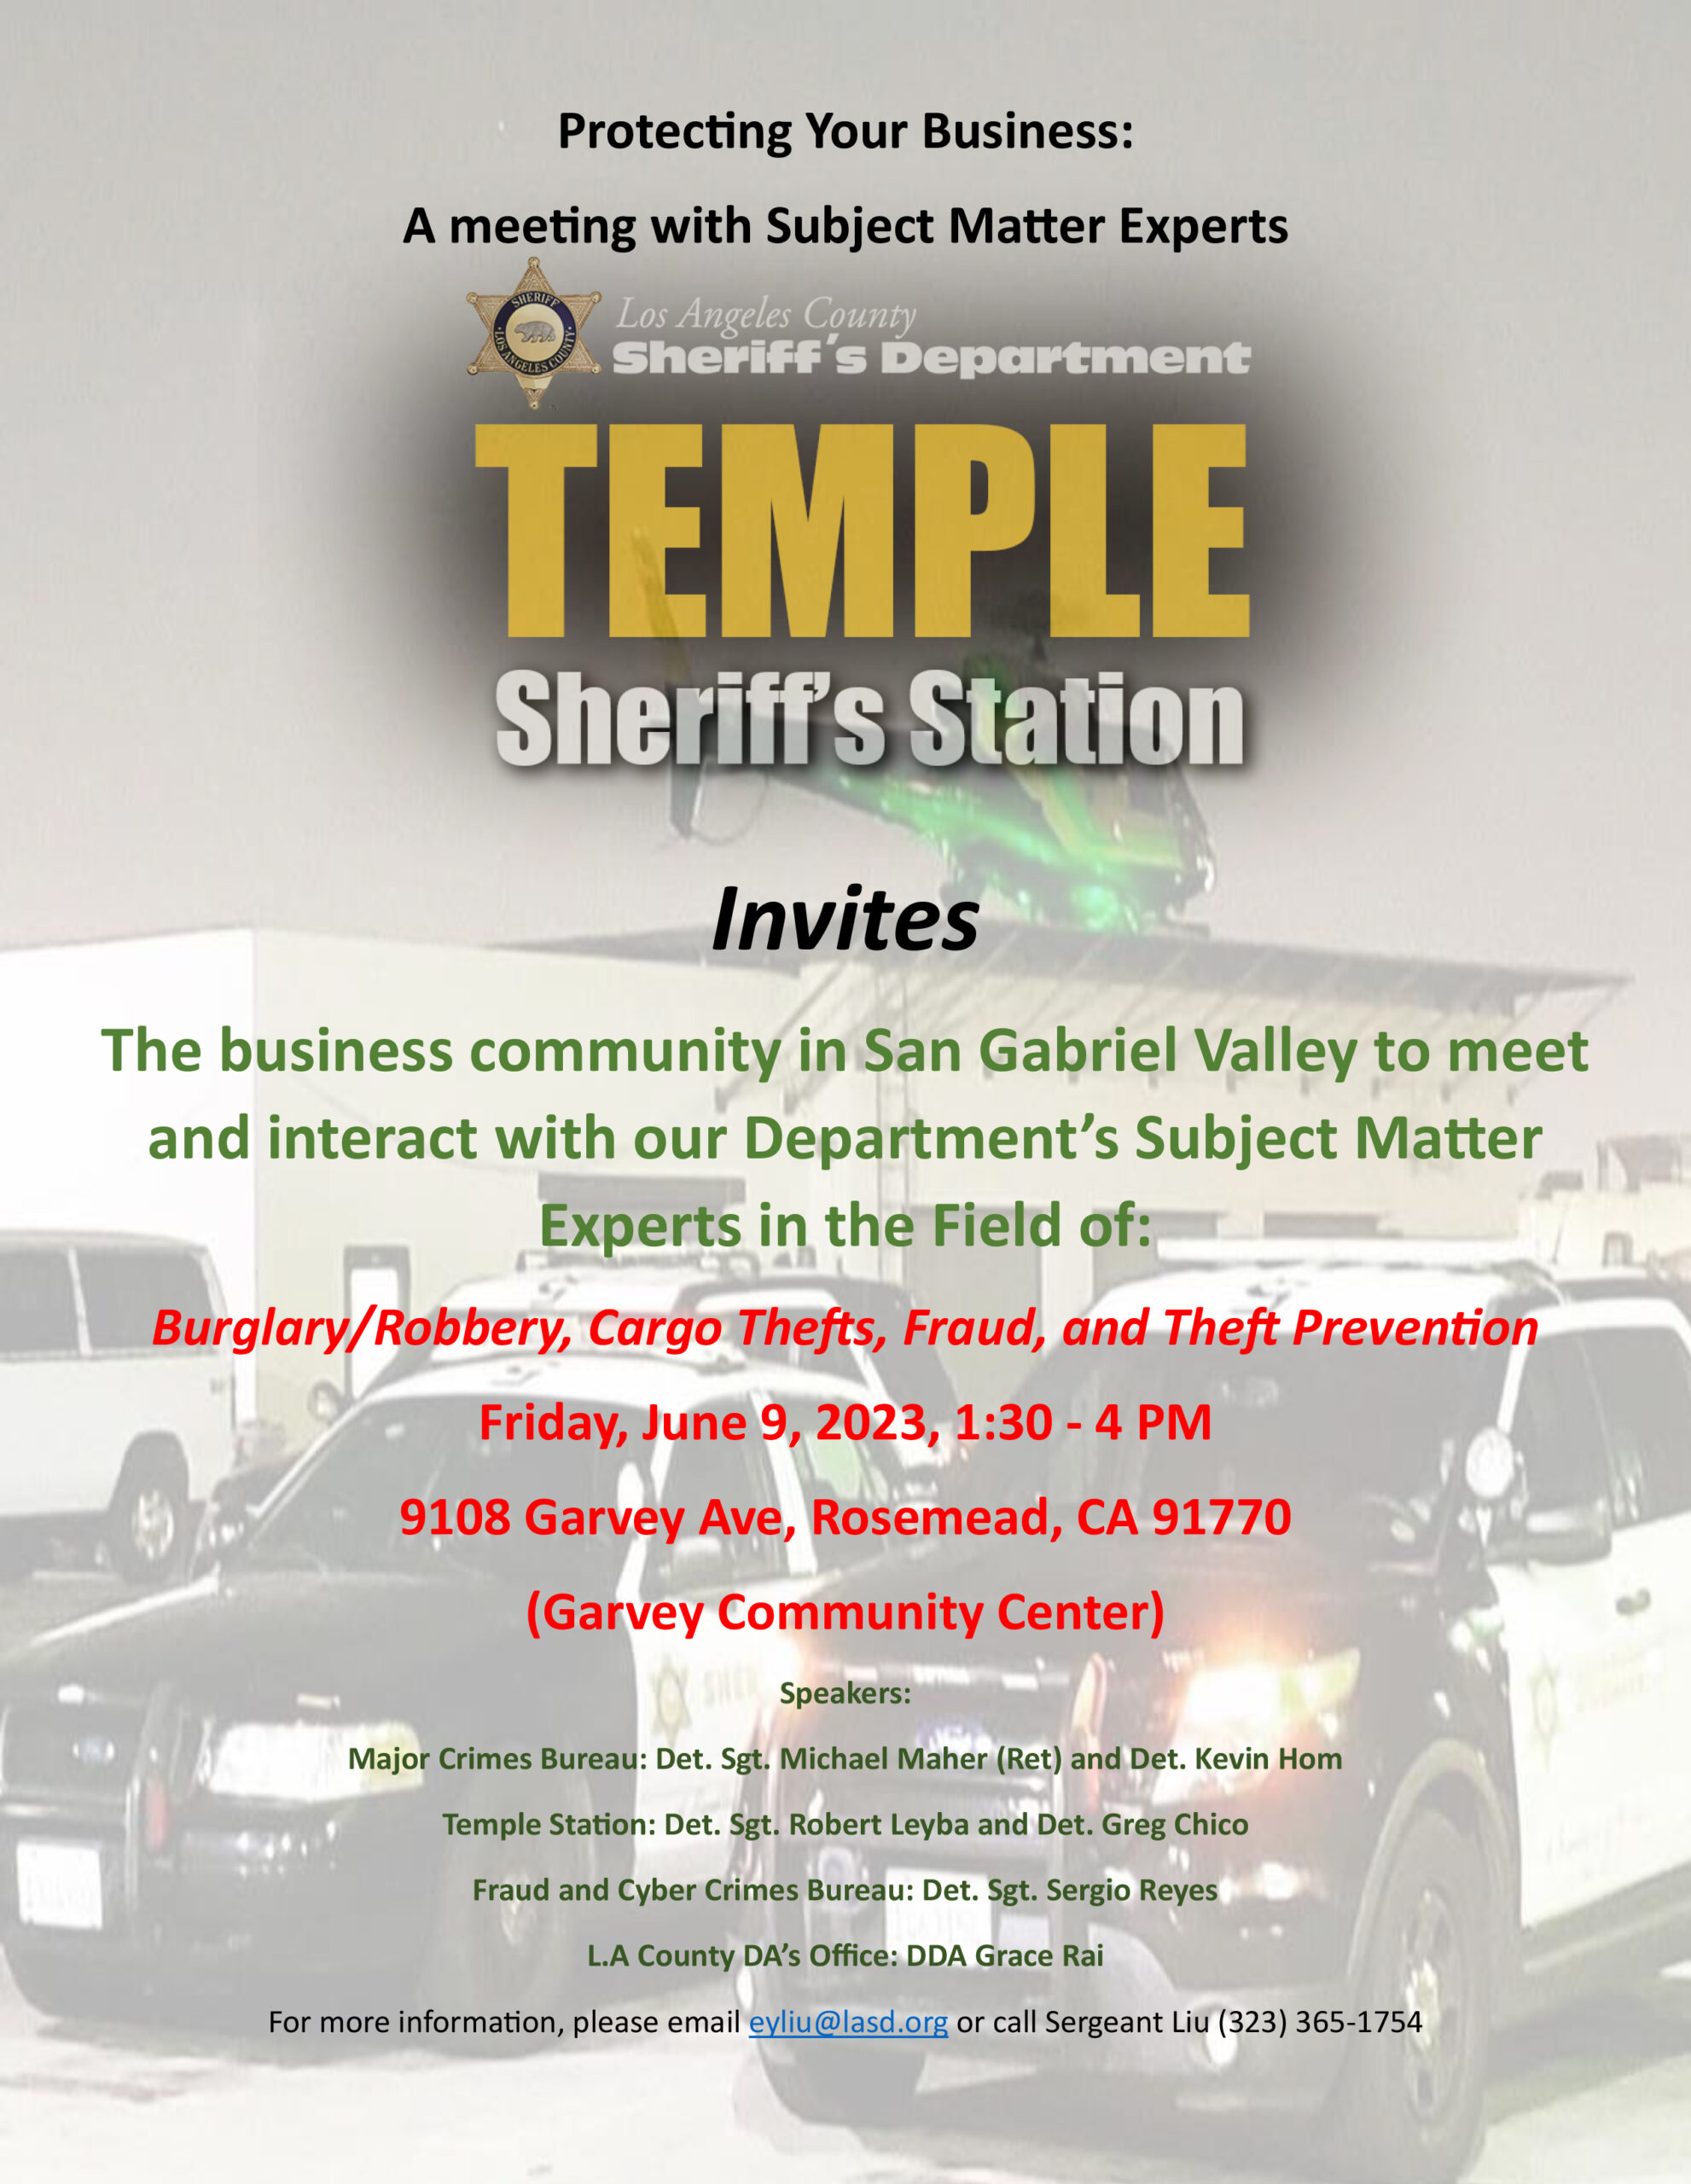 Temple City Sheriff Station Business Community event